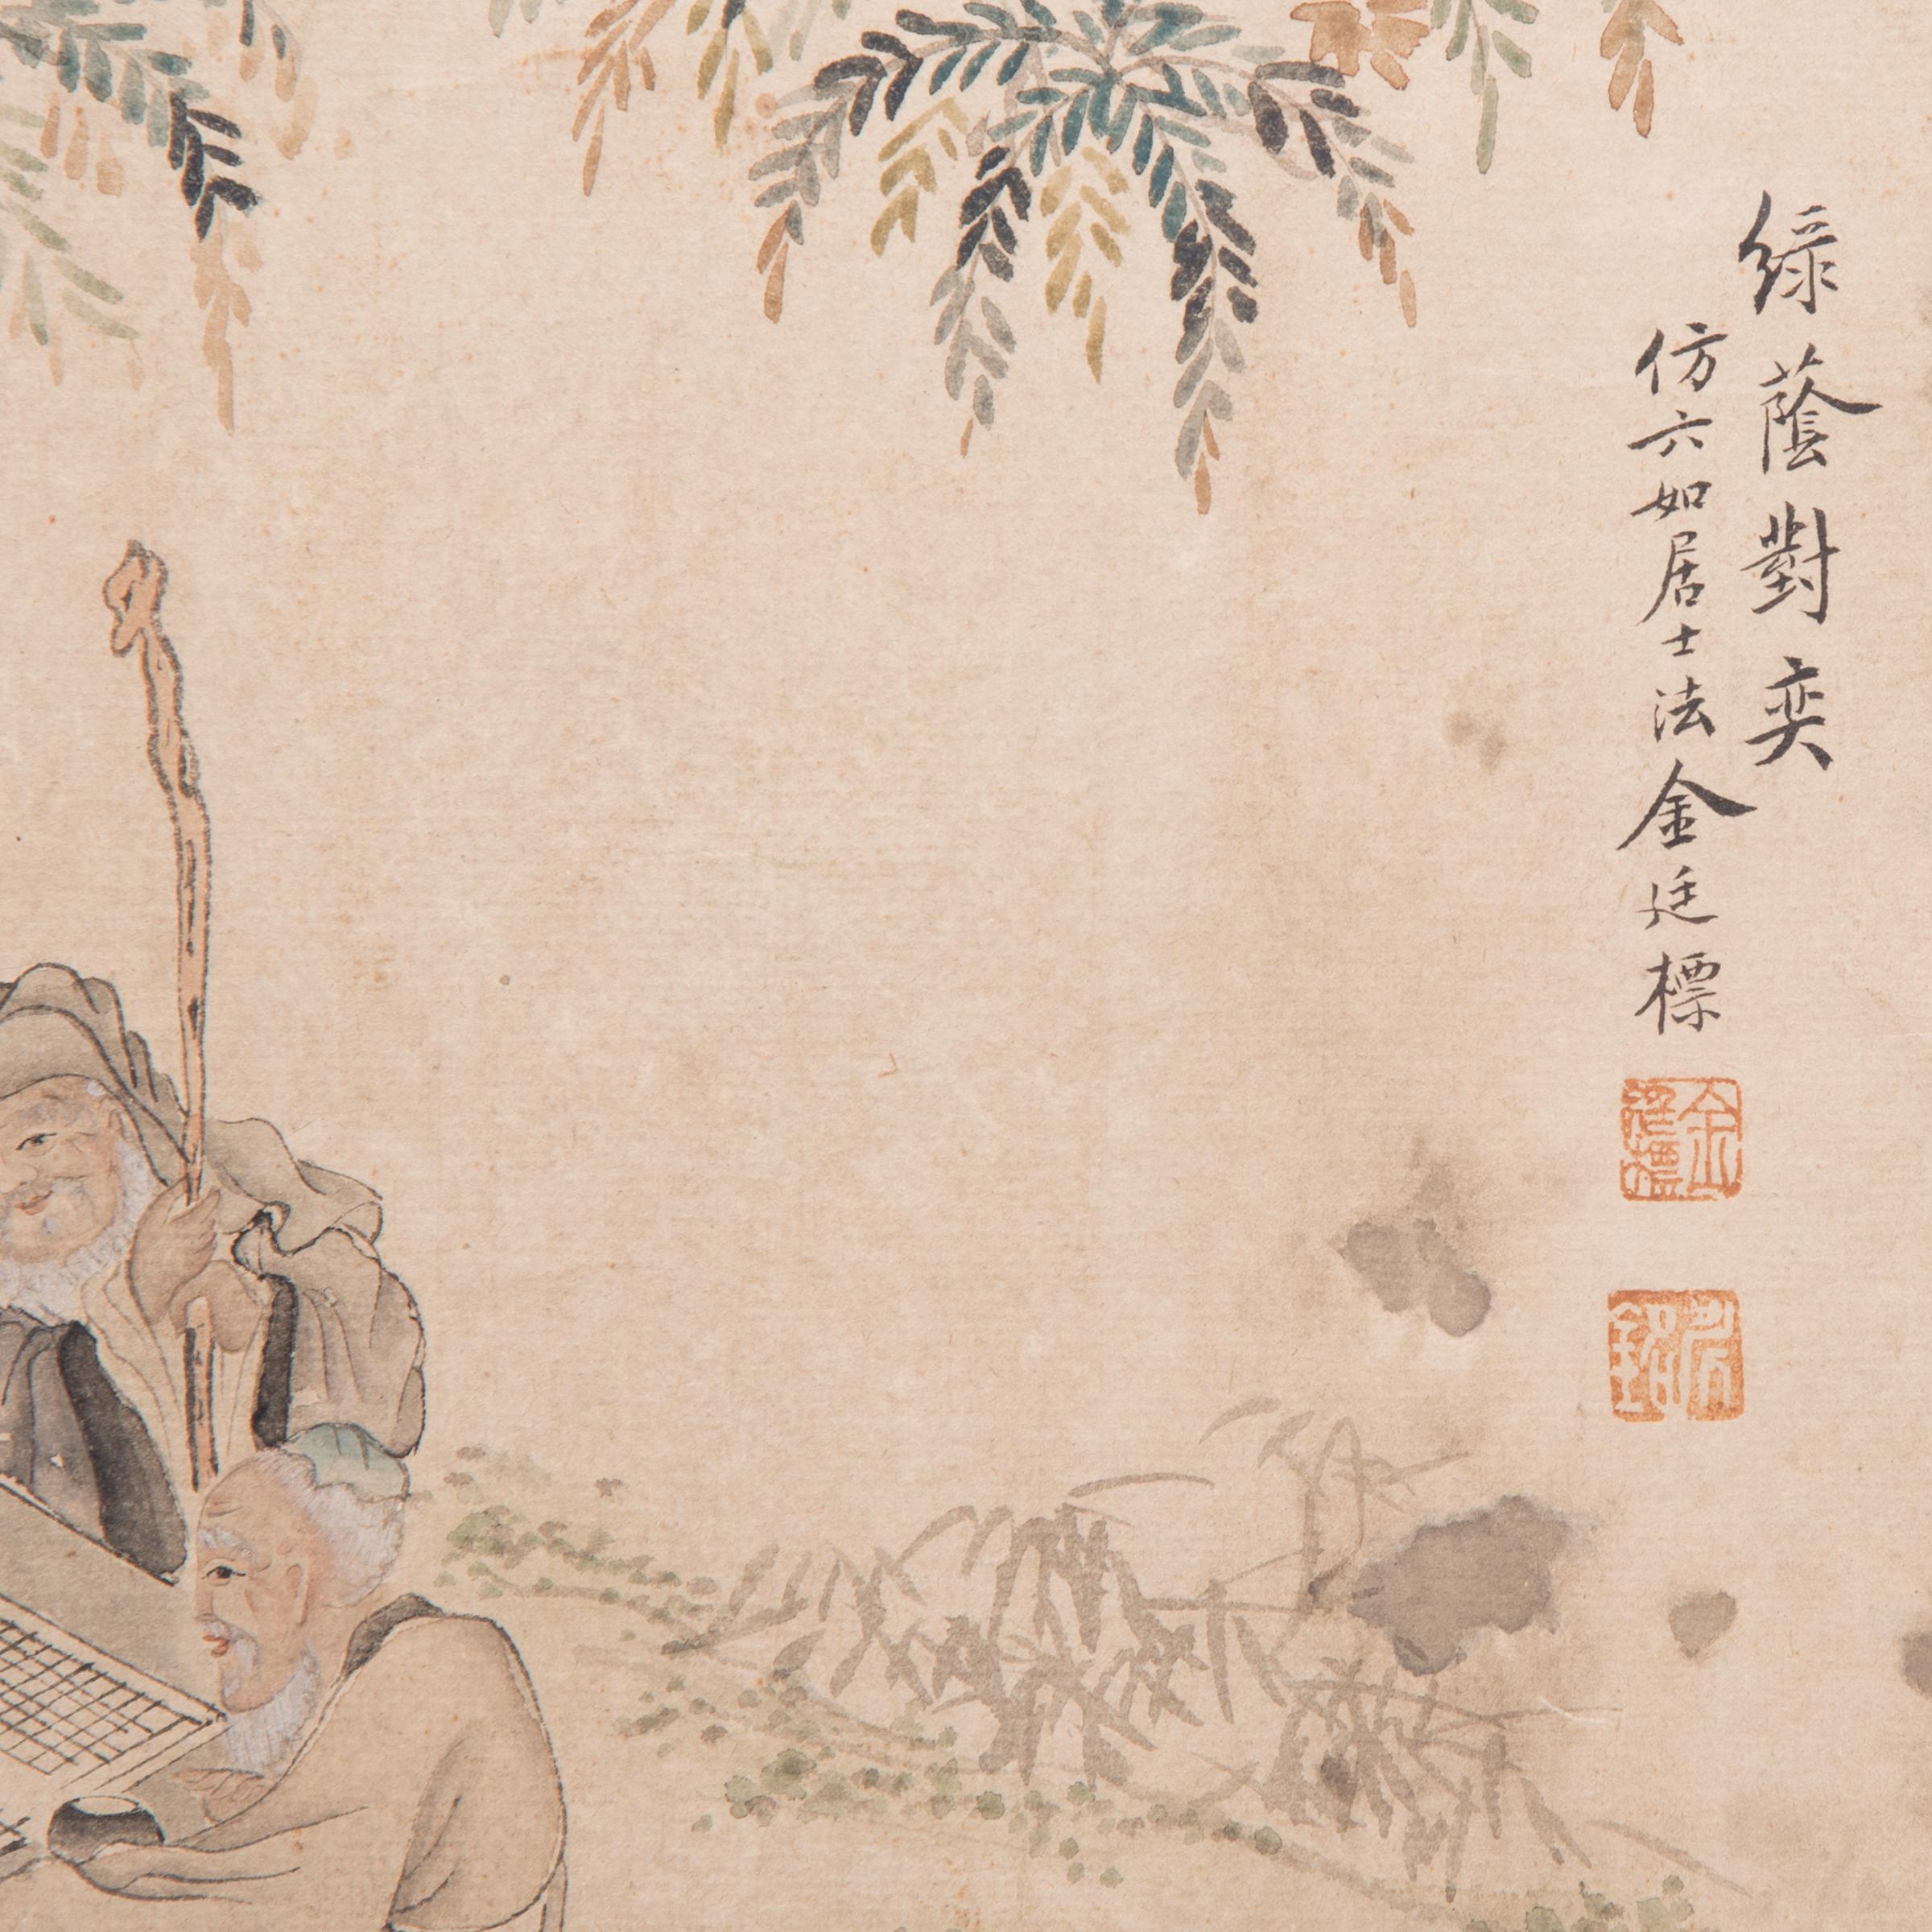 Scholars' Game Beneath the Shade of a Tree - Qing Art by Unknown